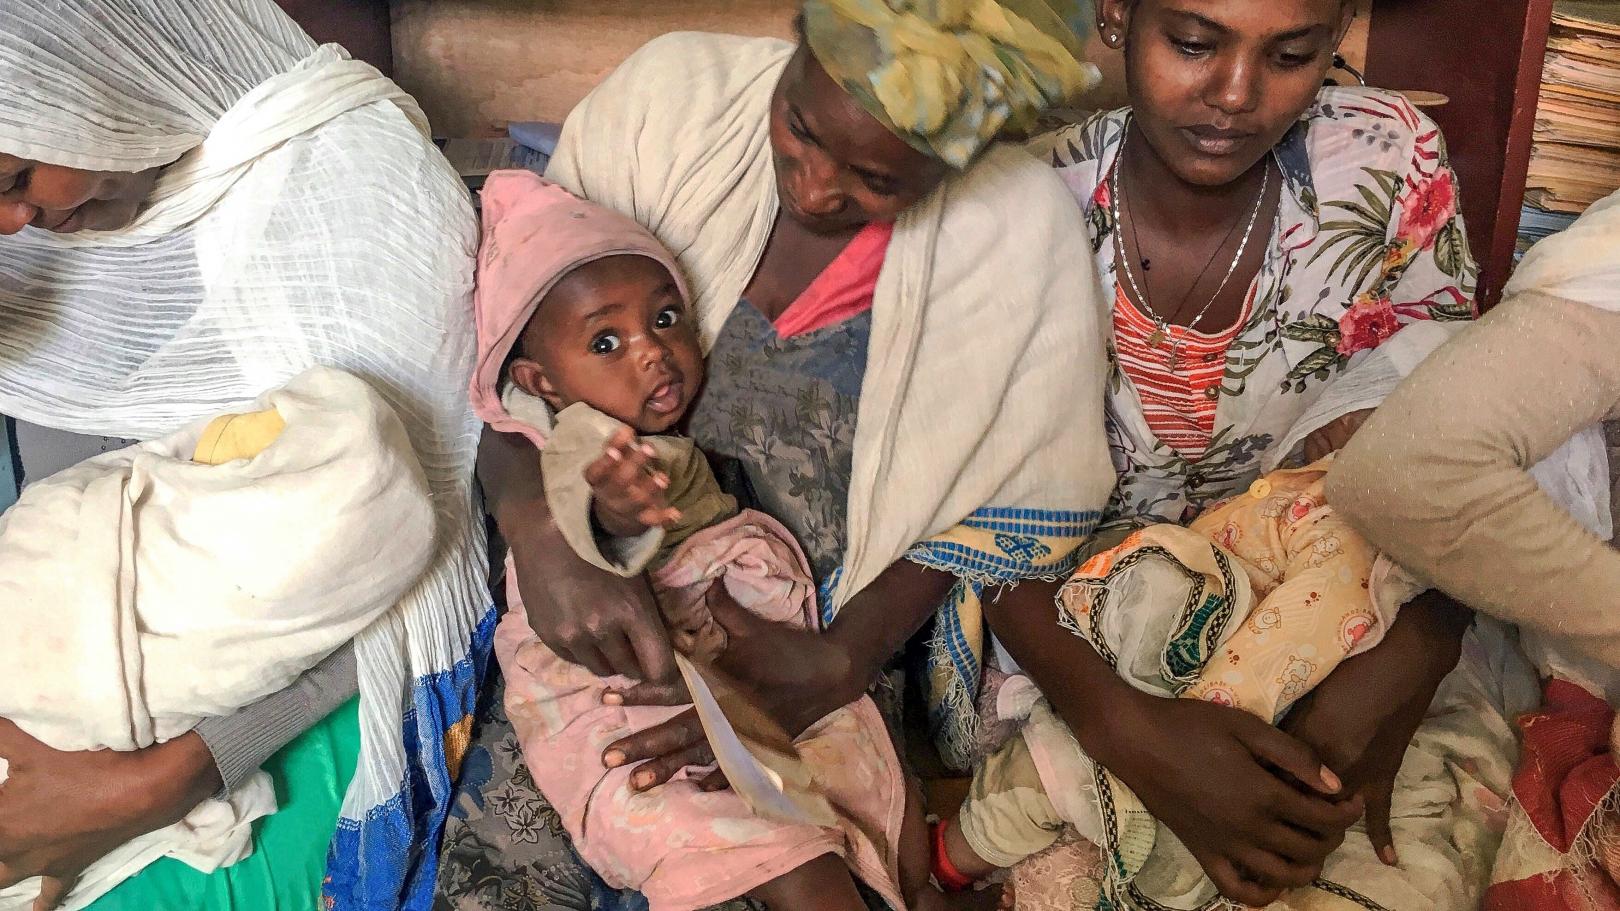 Getting vaccinated is celebrated in Ethiopia, where it means giving children the chance at a healthy life.